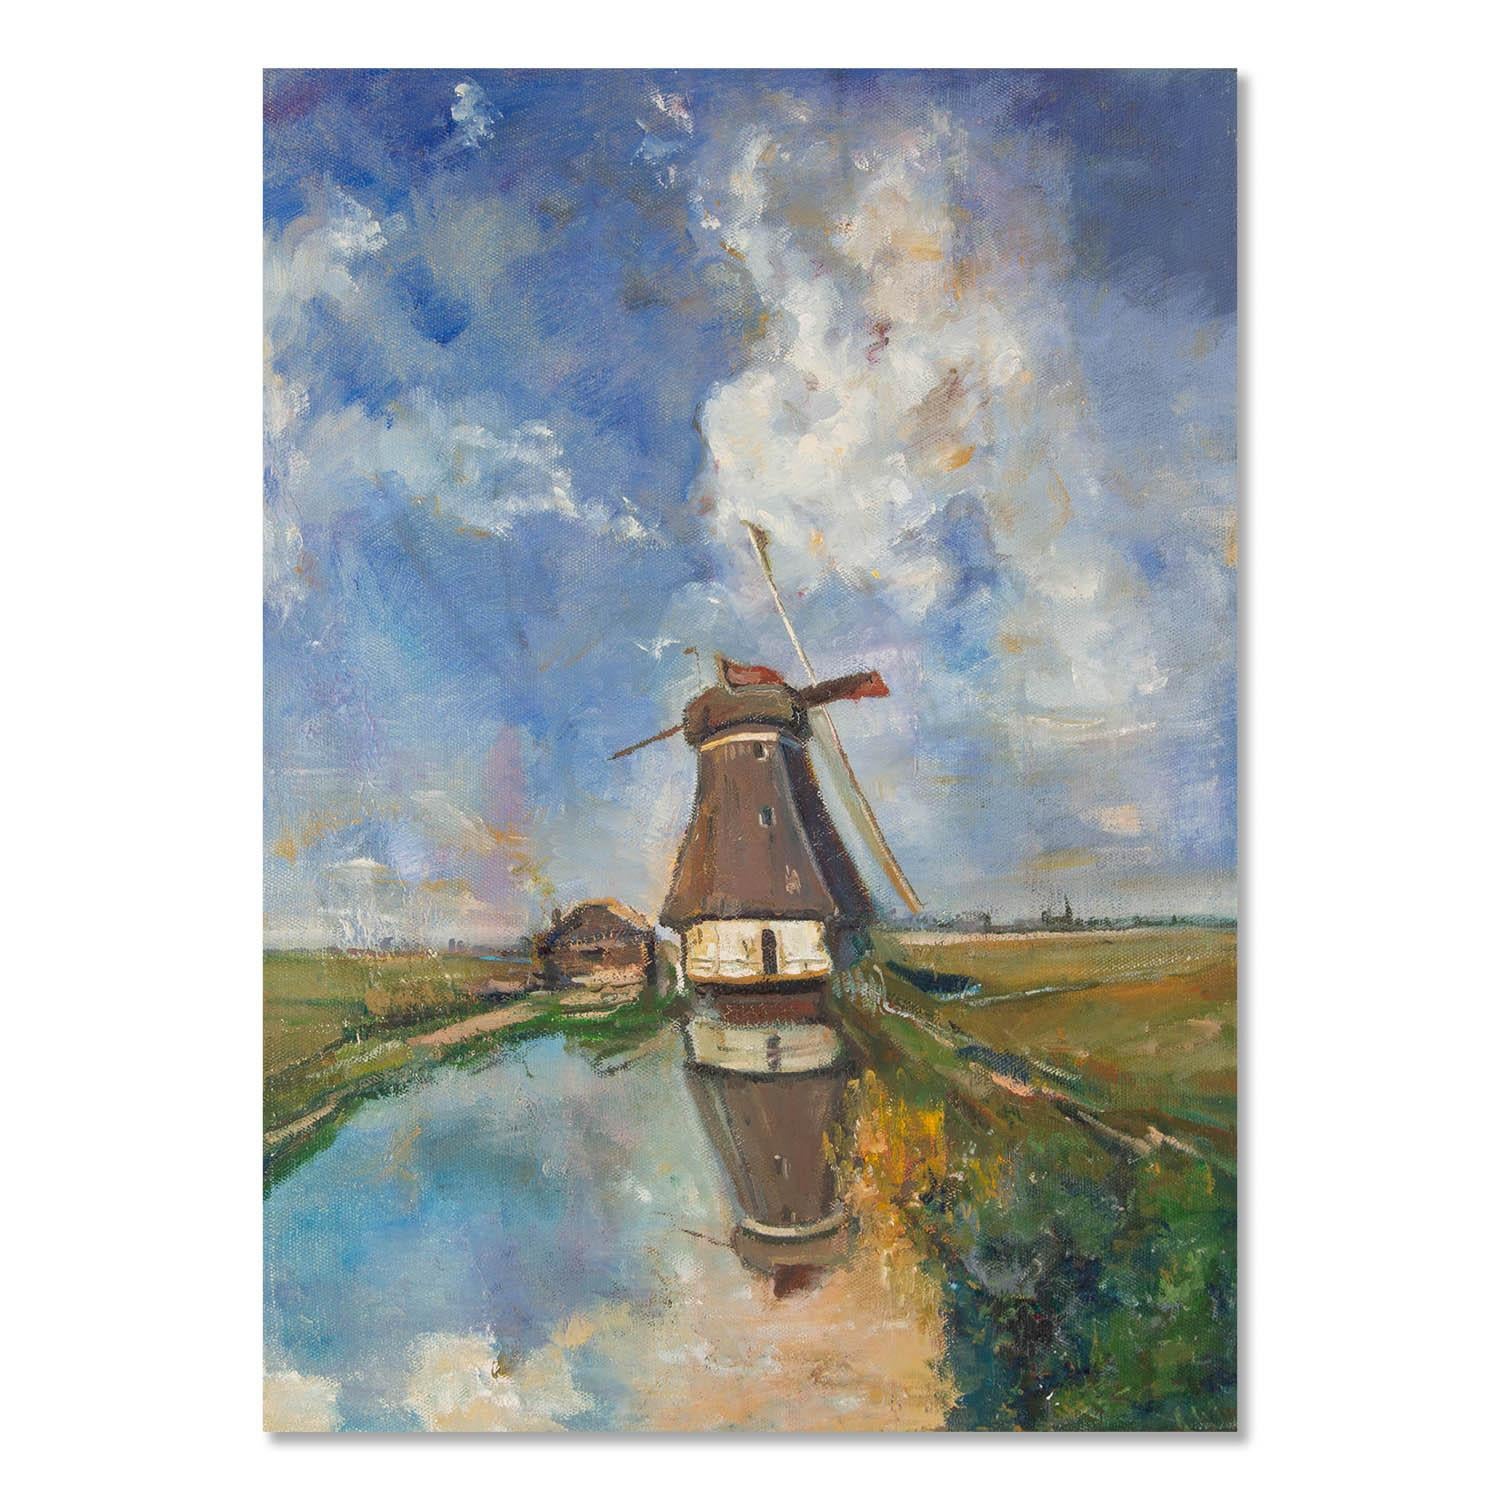  Title: Windmill
 Medium: Oil on canvas
 Size: 26 x 19 inches
 Frame: Framing options available!
 Condition: The painting appears to be in excellent condition.
 
 Year: 2000 Circa
 Artist: Zeyu Zhang
 Signature: Unsigned
 Signature Location: N/A
